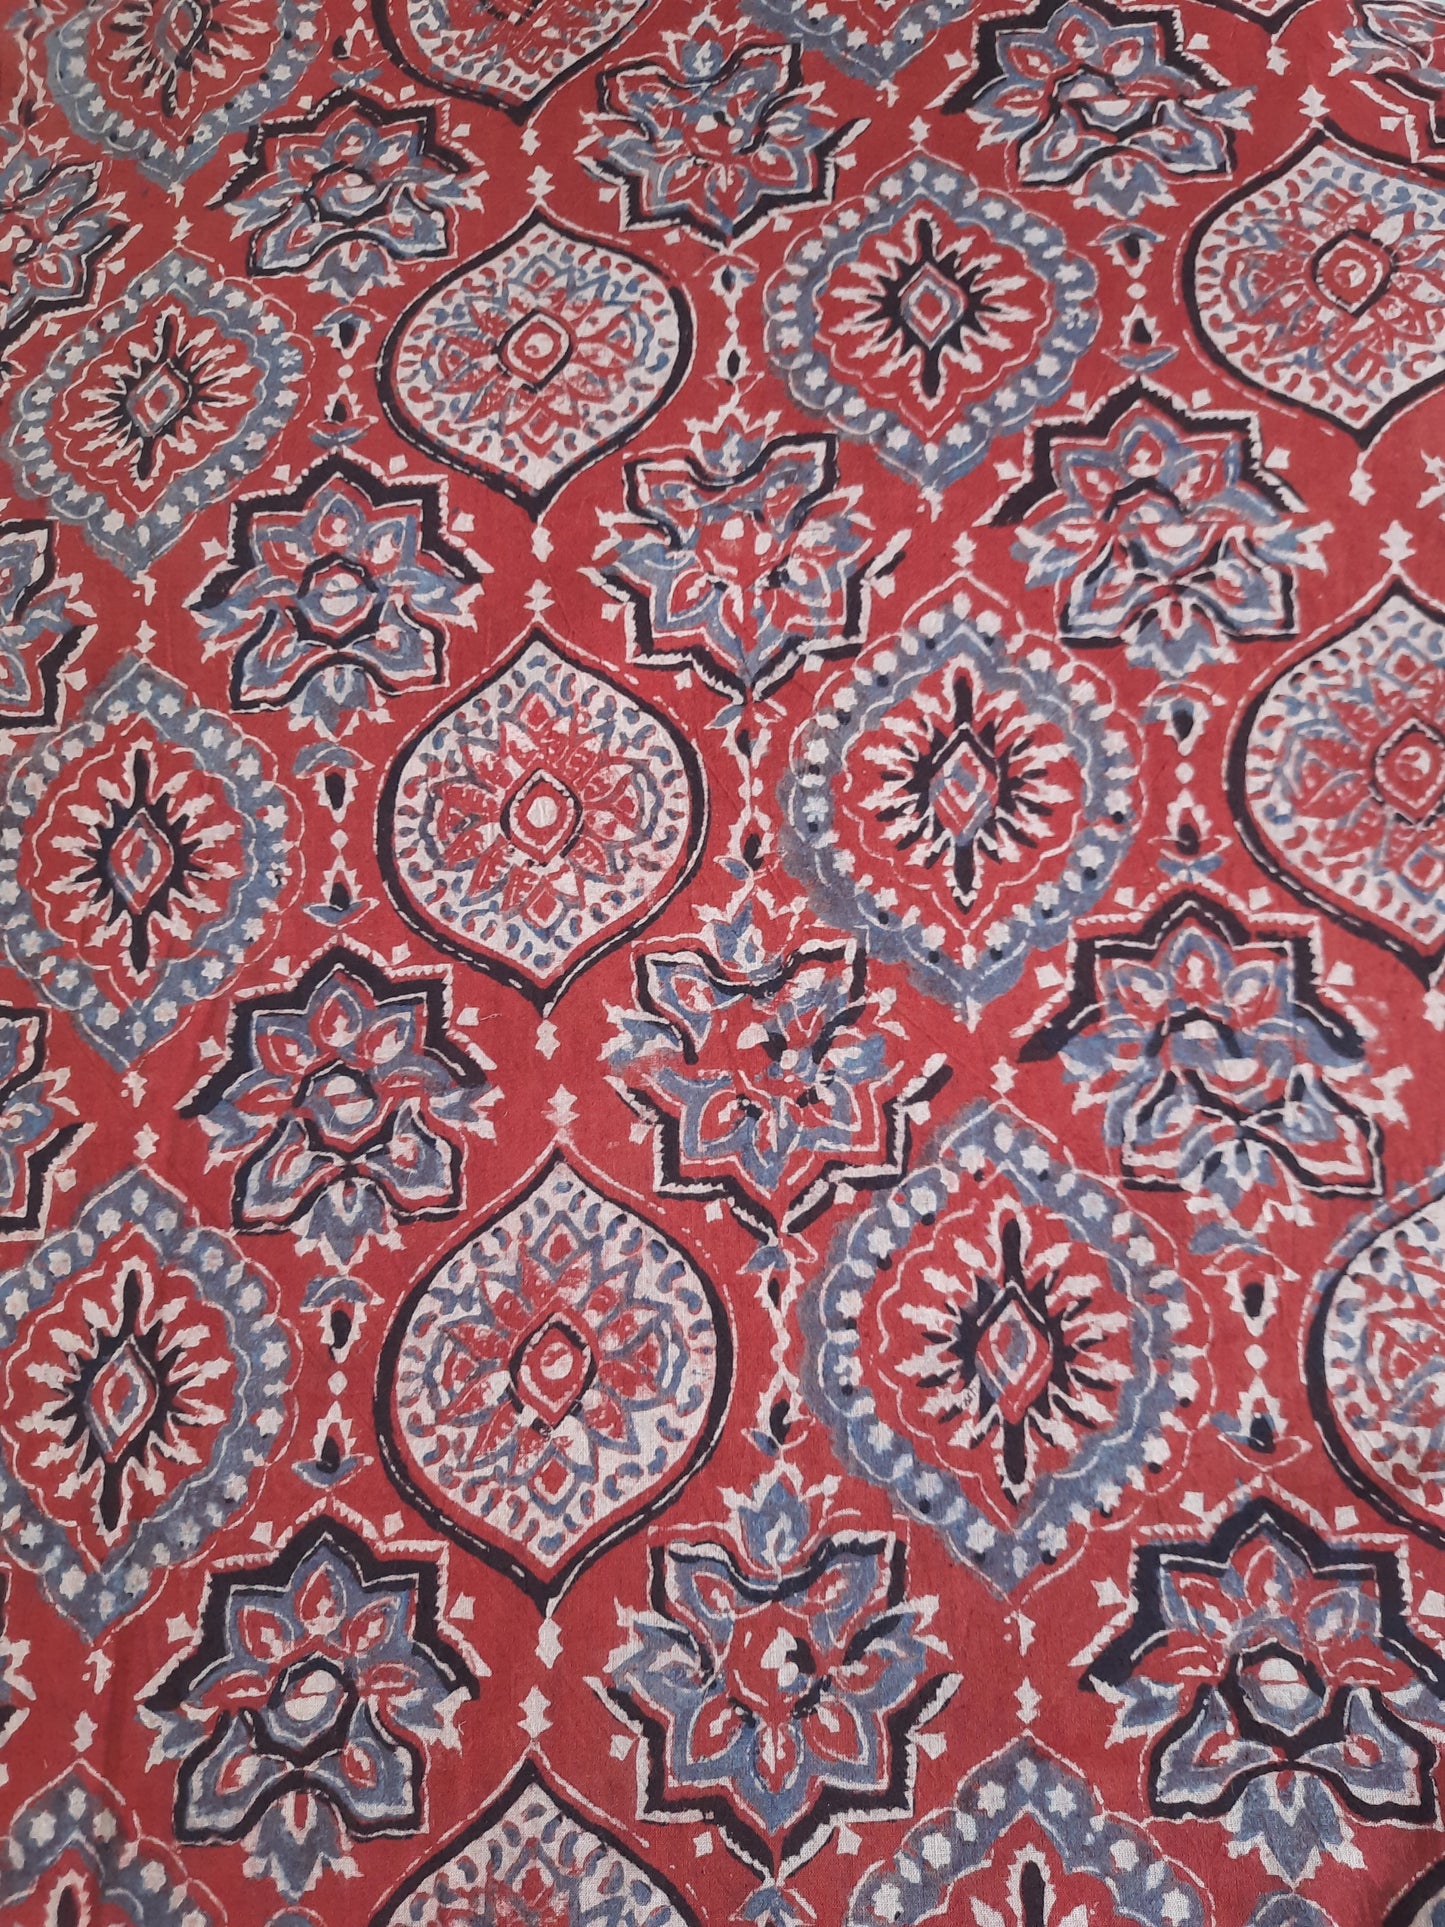 Pure Cotton Madder Ajrakh Hand Block Print Fabric by Turquoisethestore, showcasing intricate ajrakh prints in madder dye on soft cotton.